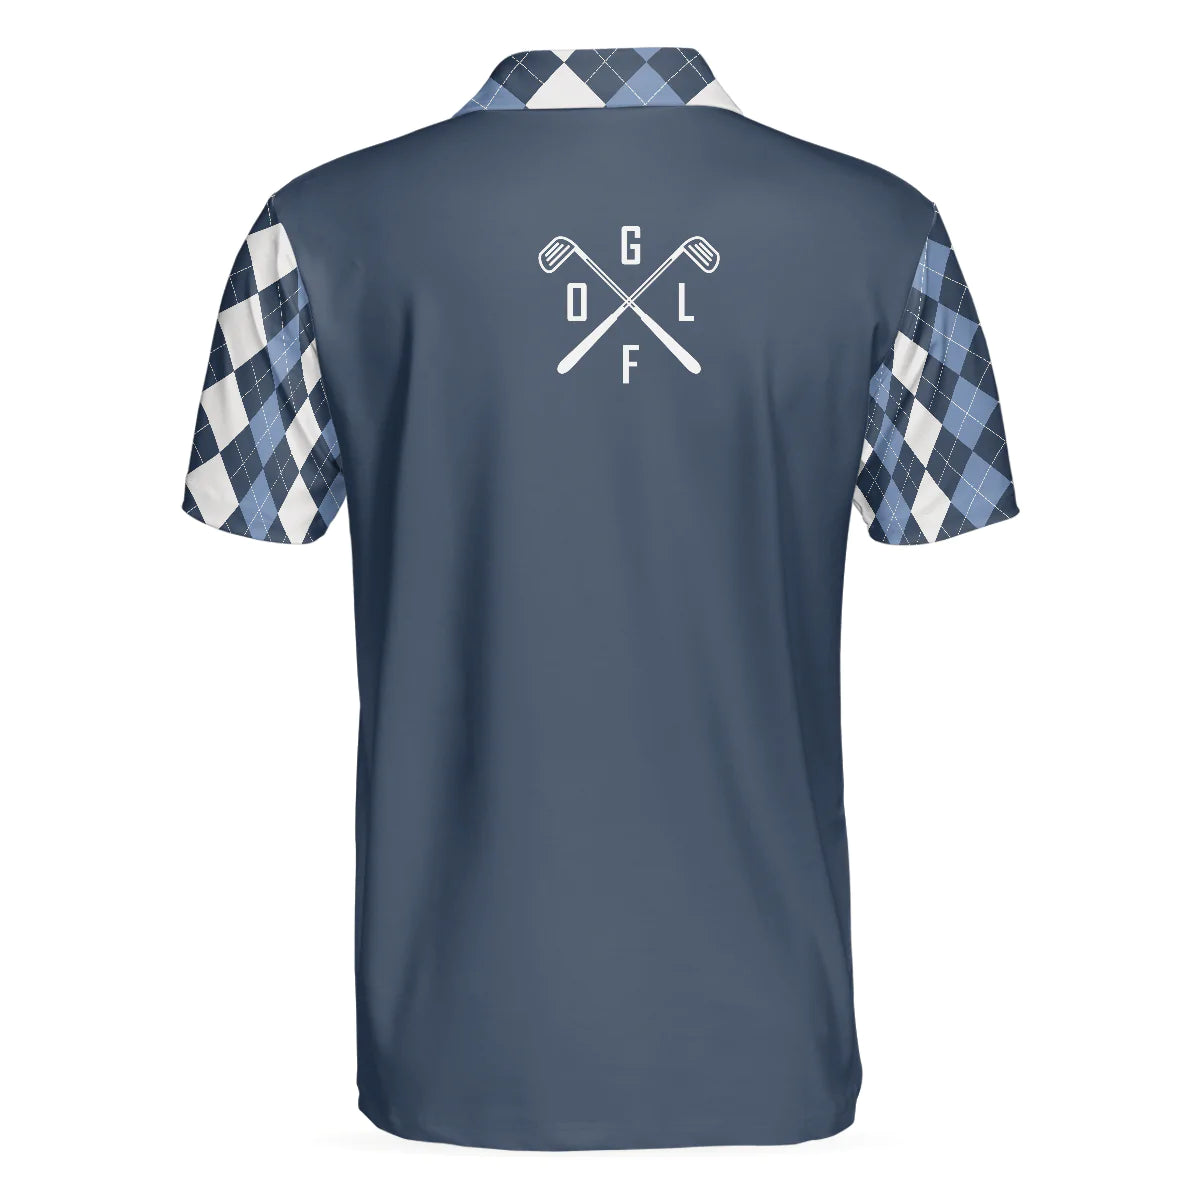 The Best Golf Shirt for Men: Argyle Pattern Short Sleeve Polo Shirt to Swing Hard and Enjoy Life’s Short Moments – GP363